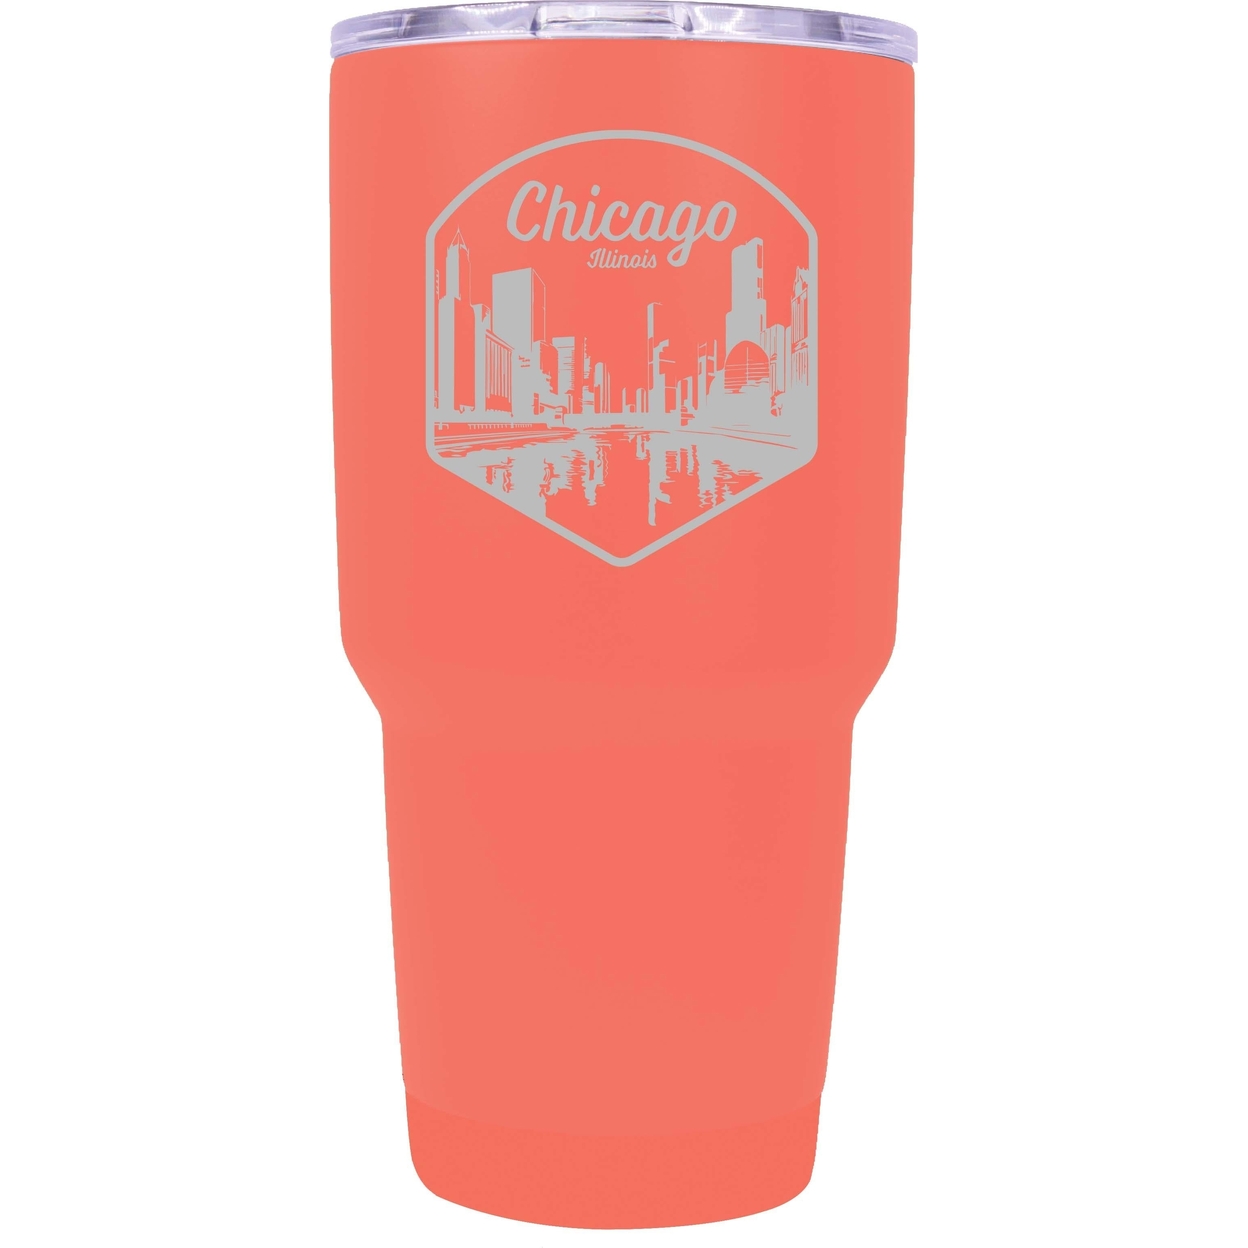 Chicago Illinois Souvenir 24 Oz Engraved Insulated Tumbler - Coral,,4-Pack